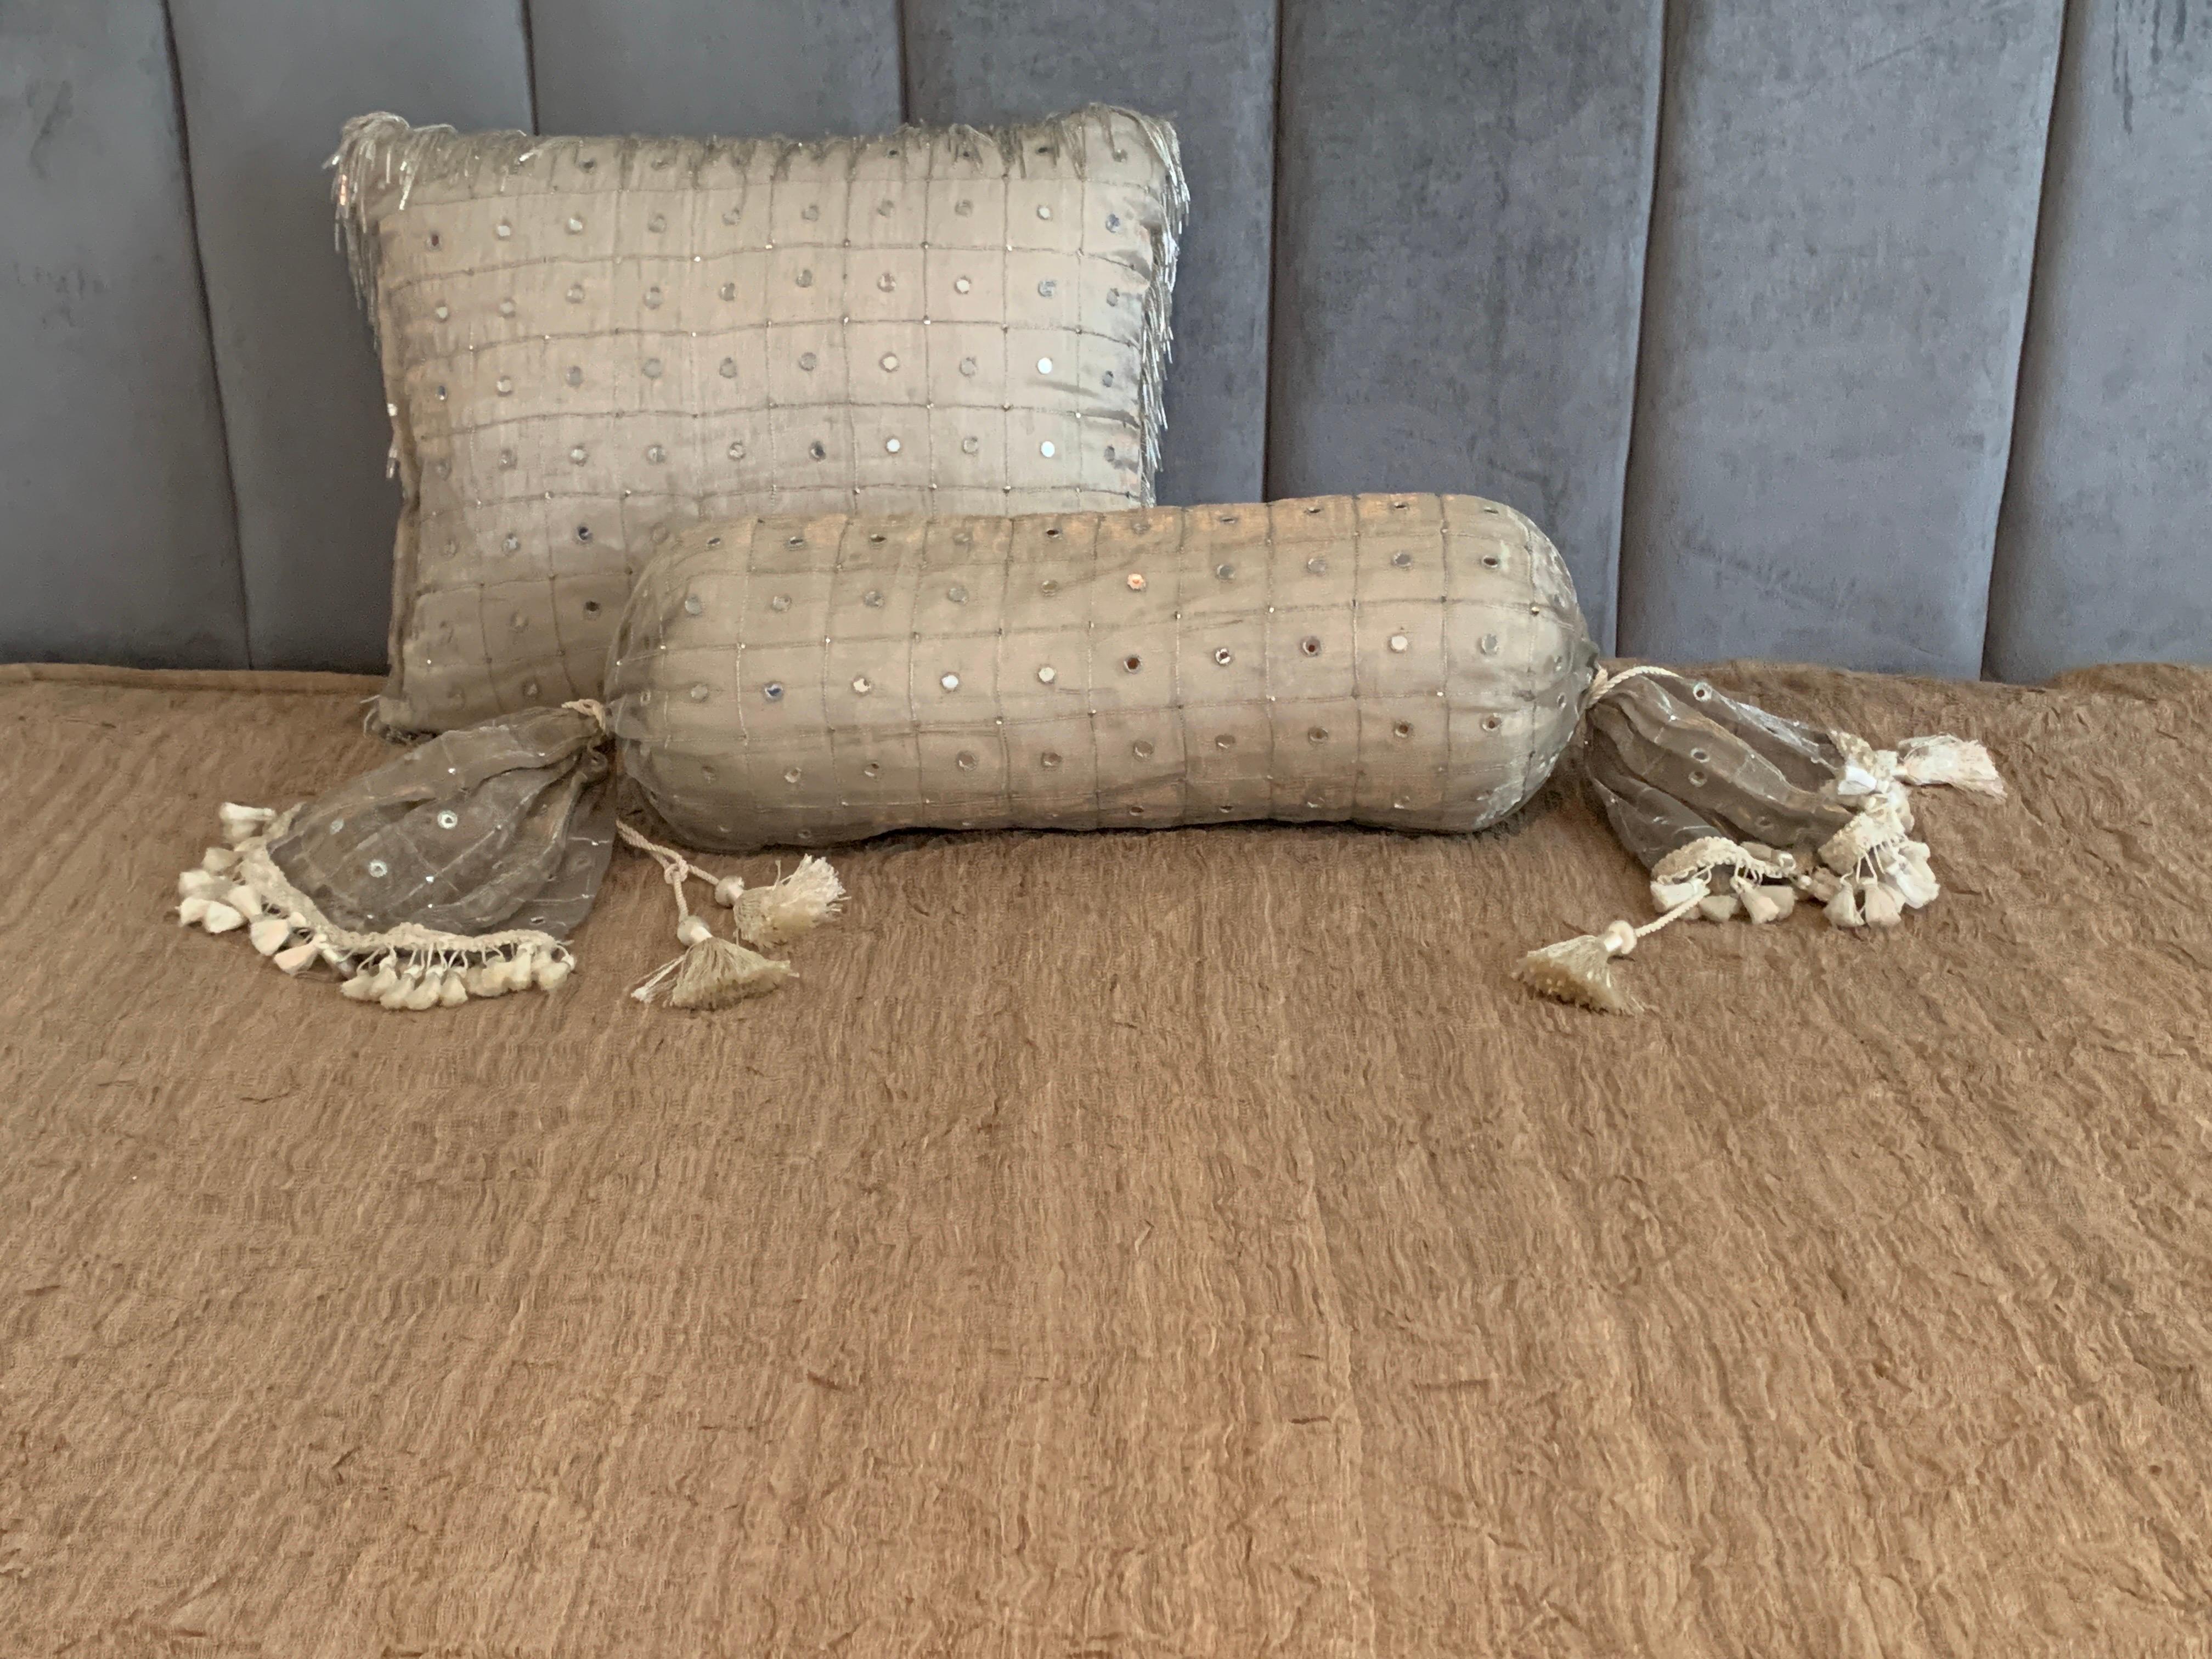 These amazing set of 2 decorative pillows are part of a luxe bedroom ensemble that cost over $8500. We broke down the ensemble and selling buy individual single pieces, or pairs when appropriate. The set was made by hand, piece by piece by a company